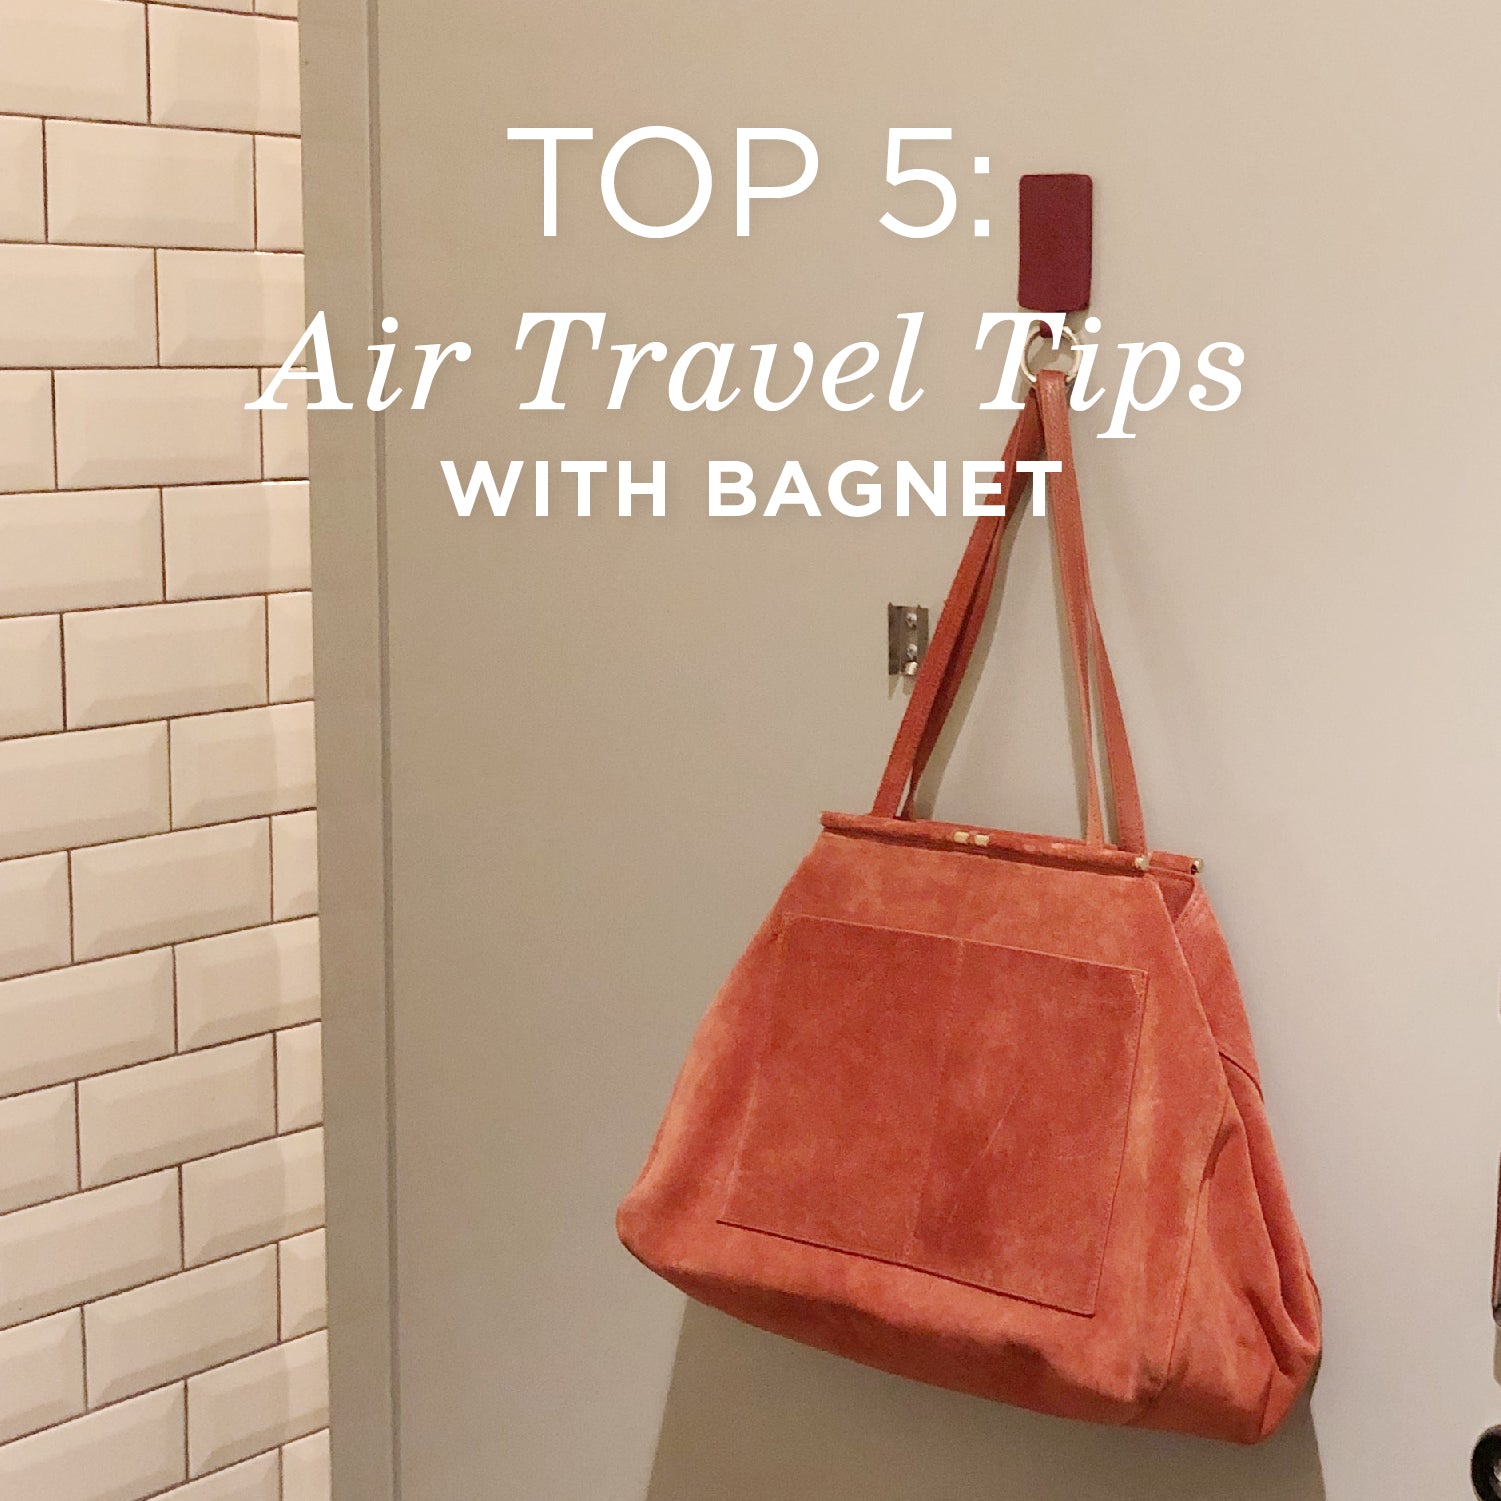 Tips and Tricks for Travel With Bagnet